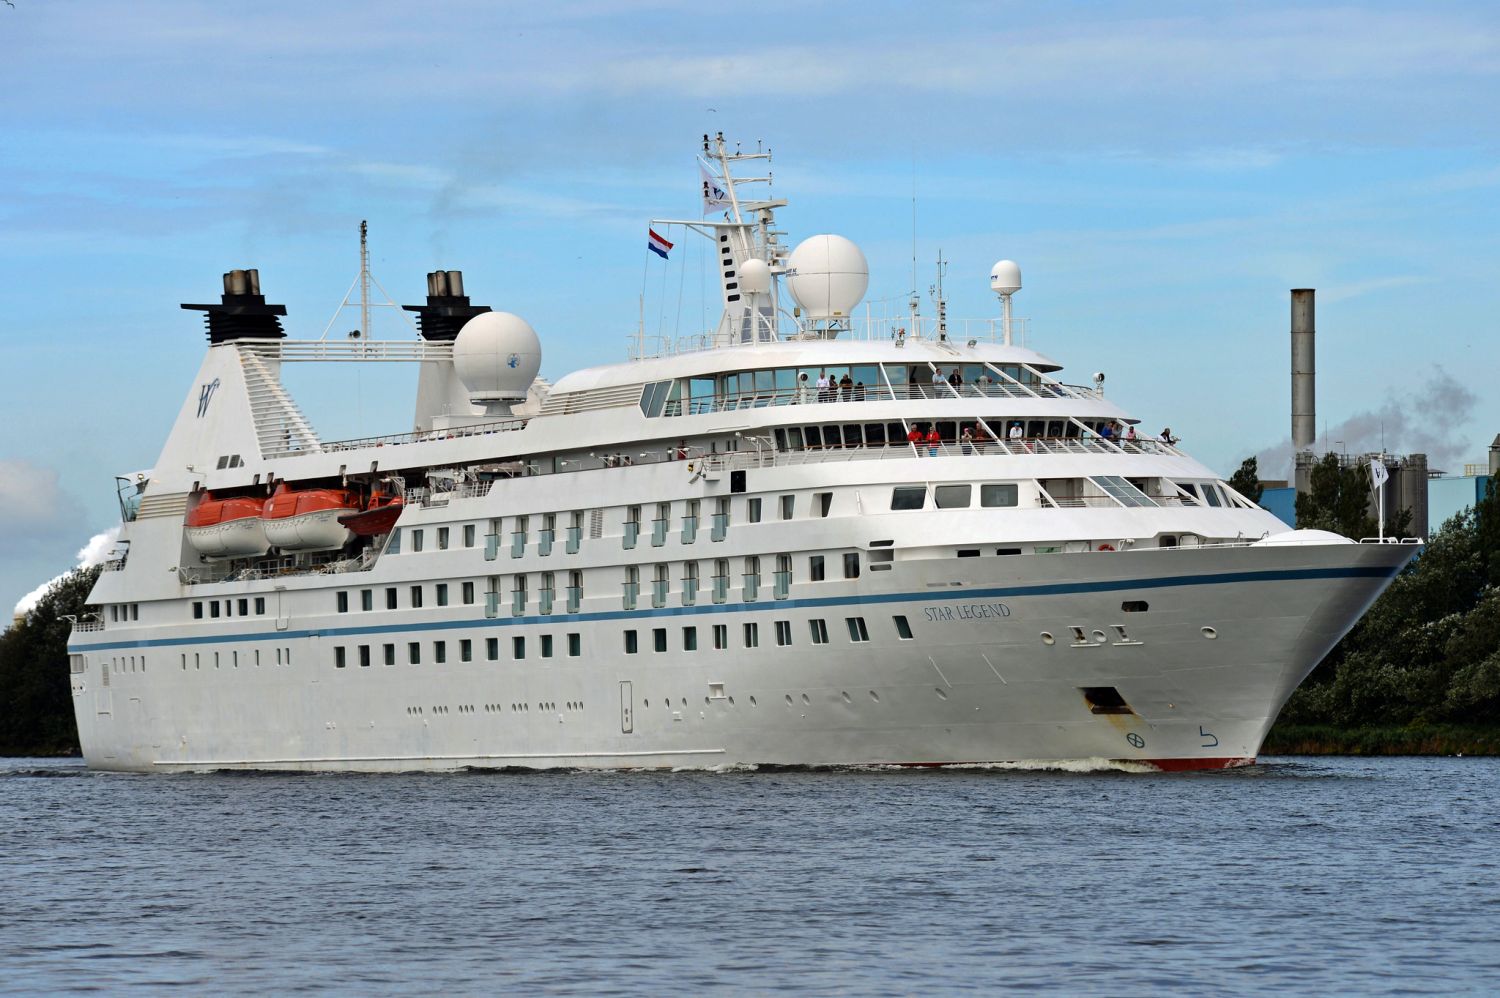 Windstar Cruises launches Mystery Cruise on Star Legend